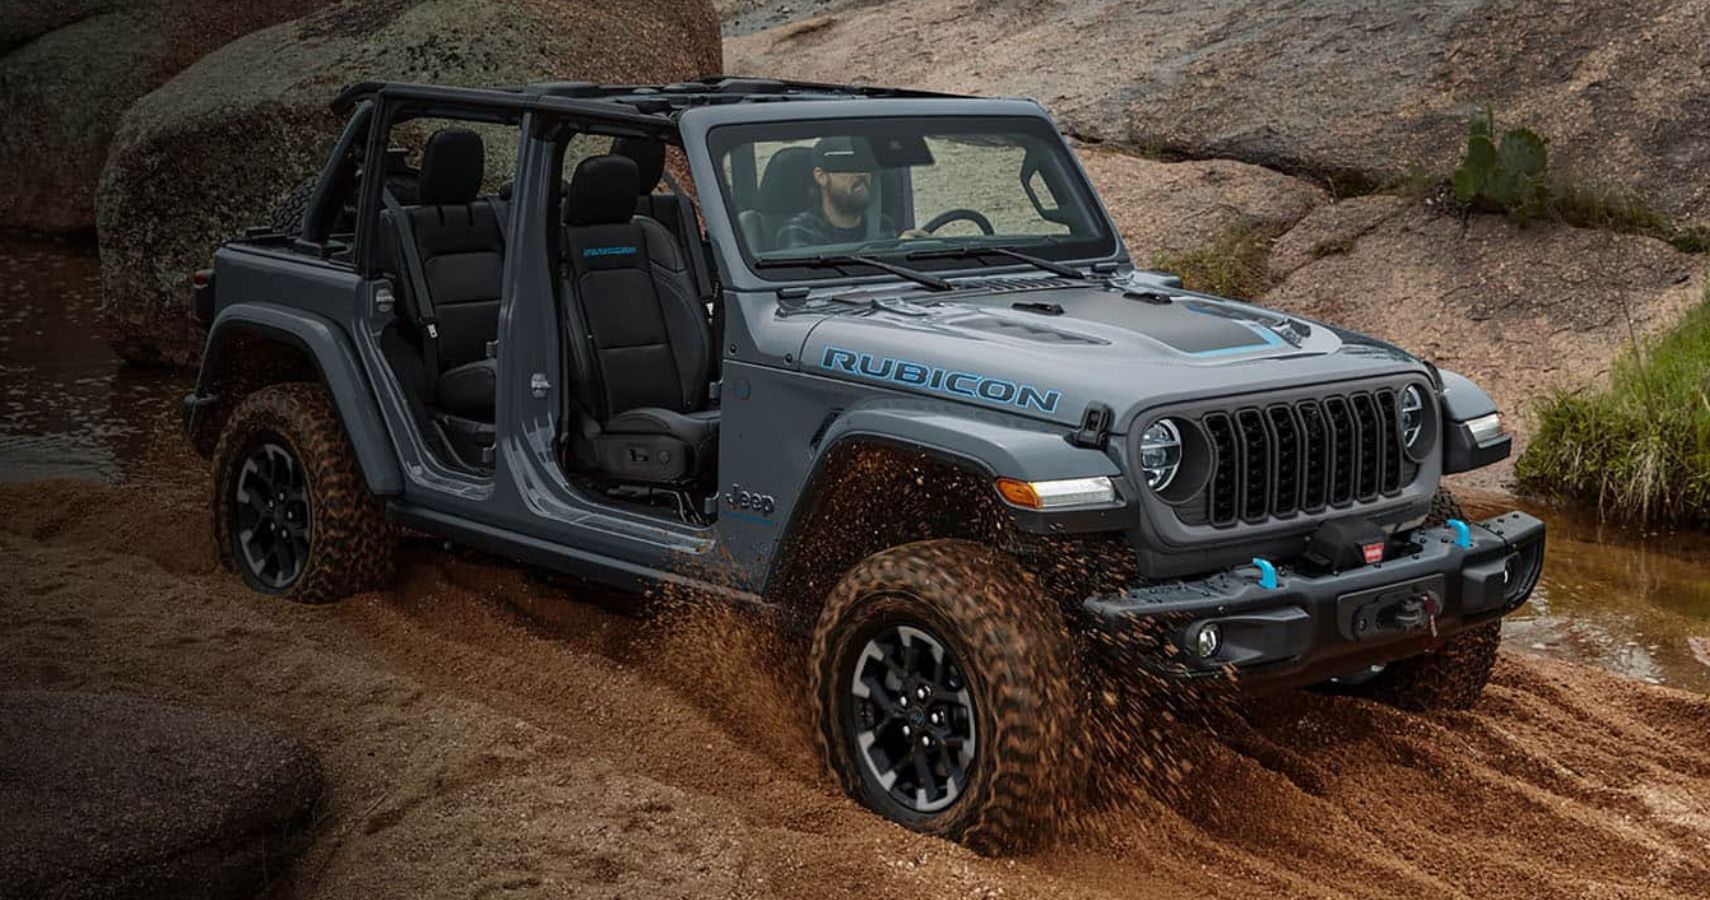 Why Americans Still Love The Jeep Wrangler Over New Ford Bronco